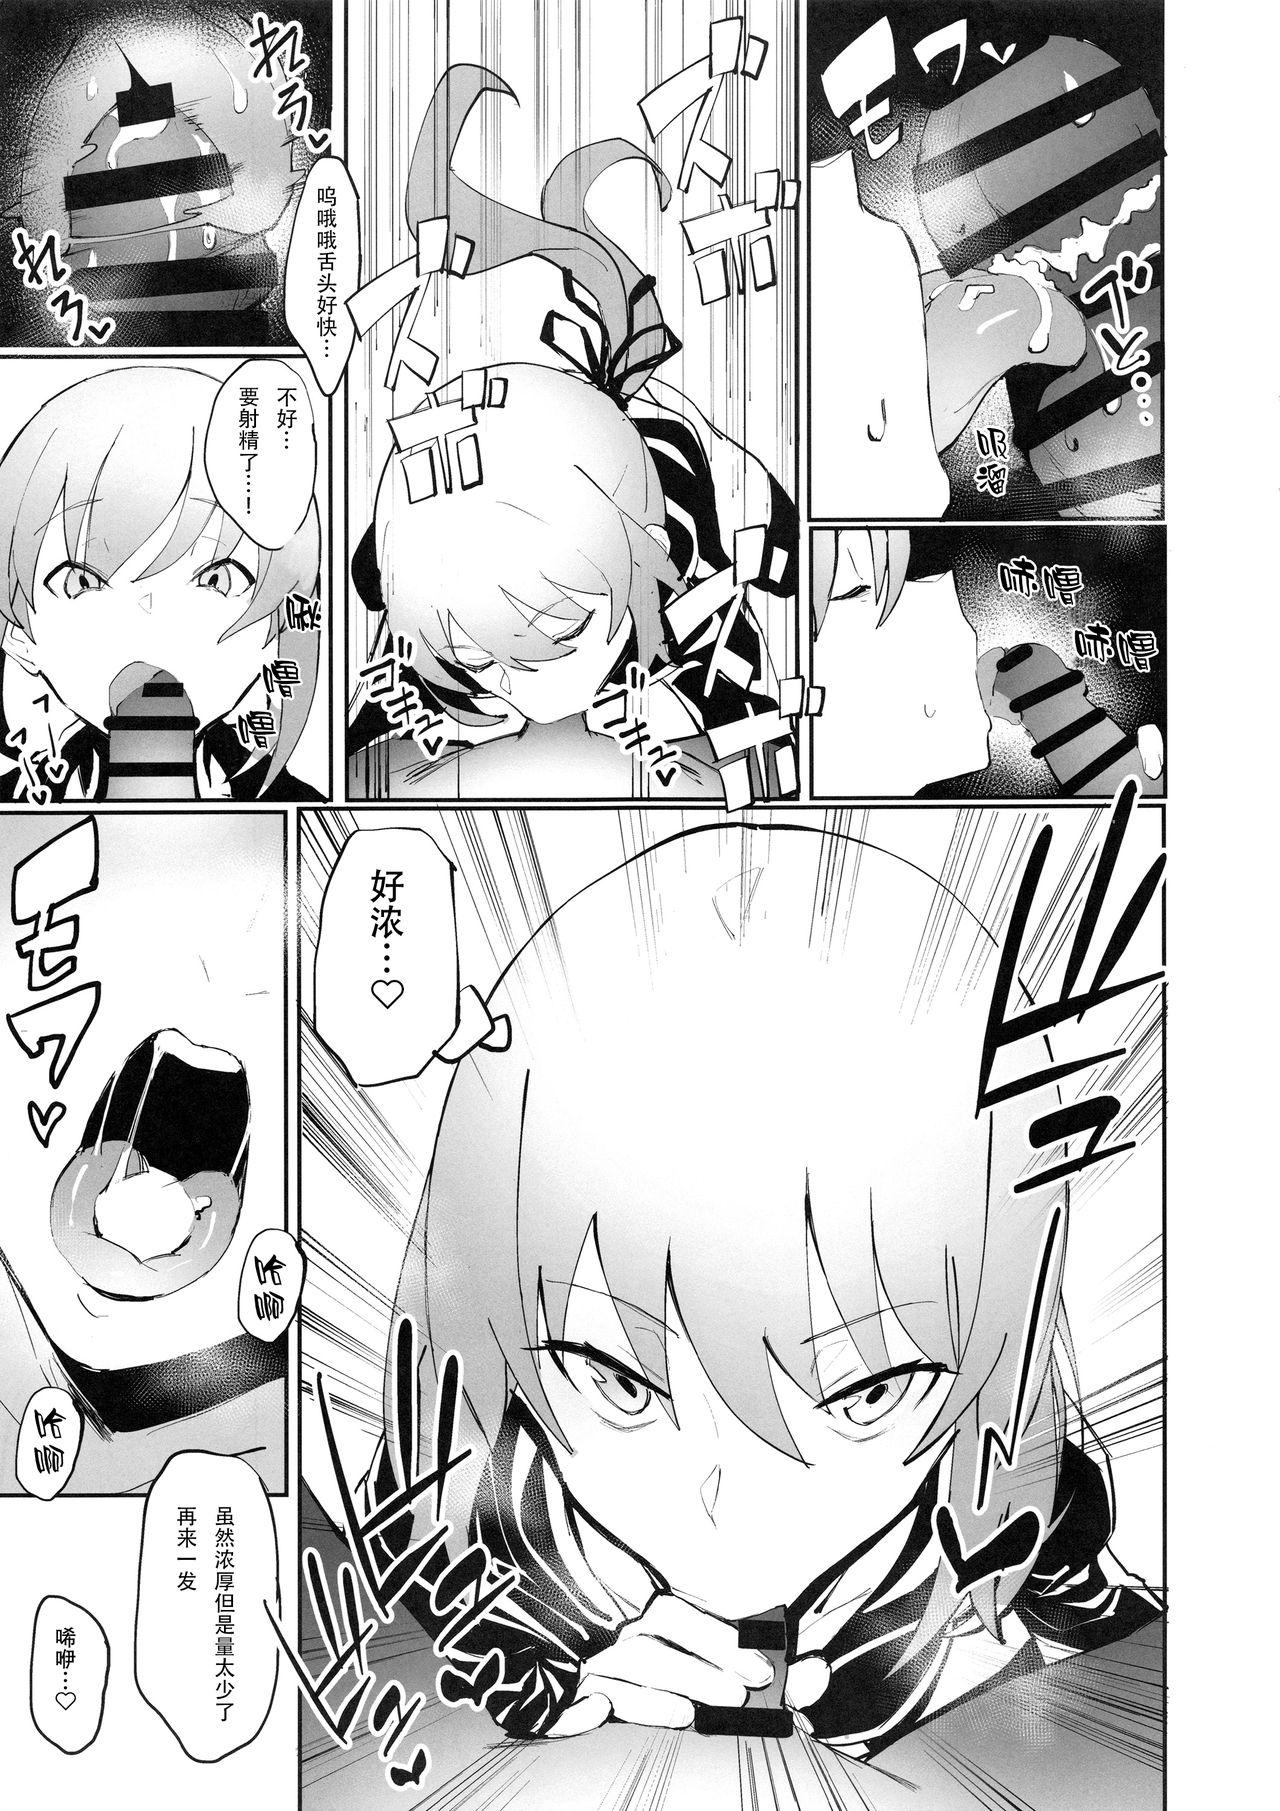 Girl Sucking Dick Saber Alter to Maryoku Kyoukyuu | 和saber alter的魔力供给♡ - Fate grand order Anal Play - Page 8